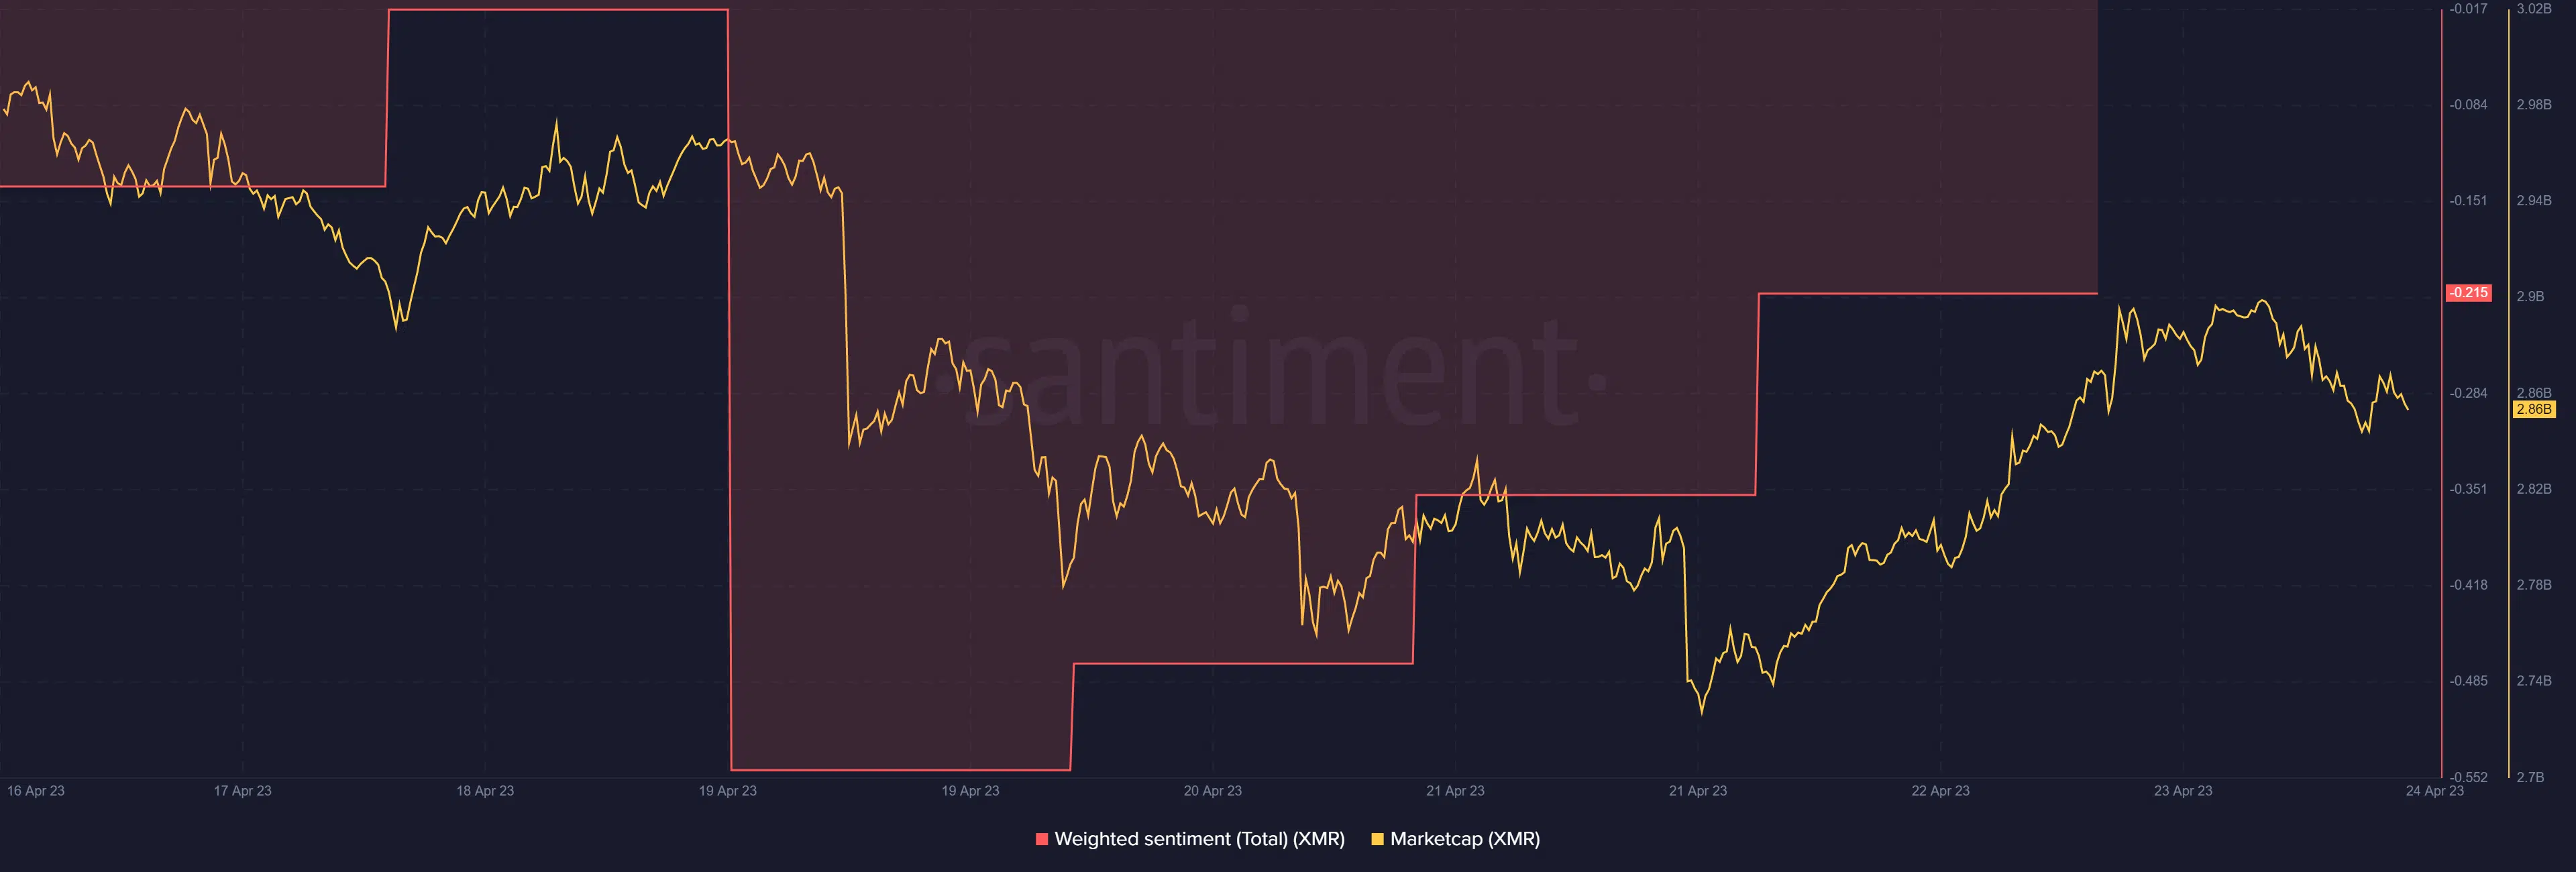 Monero market cap and weighted sentiment